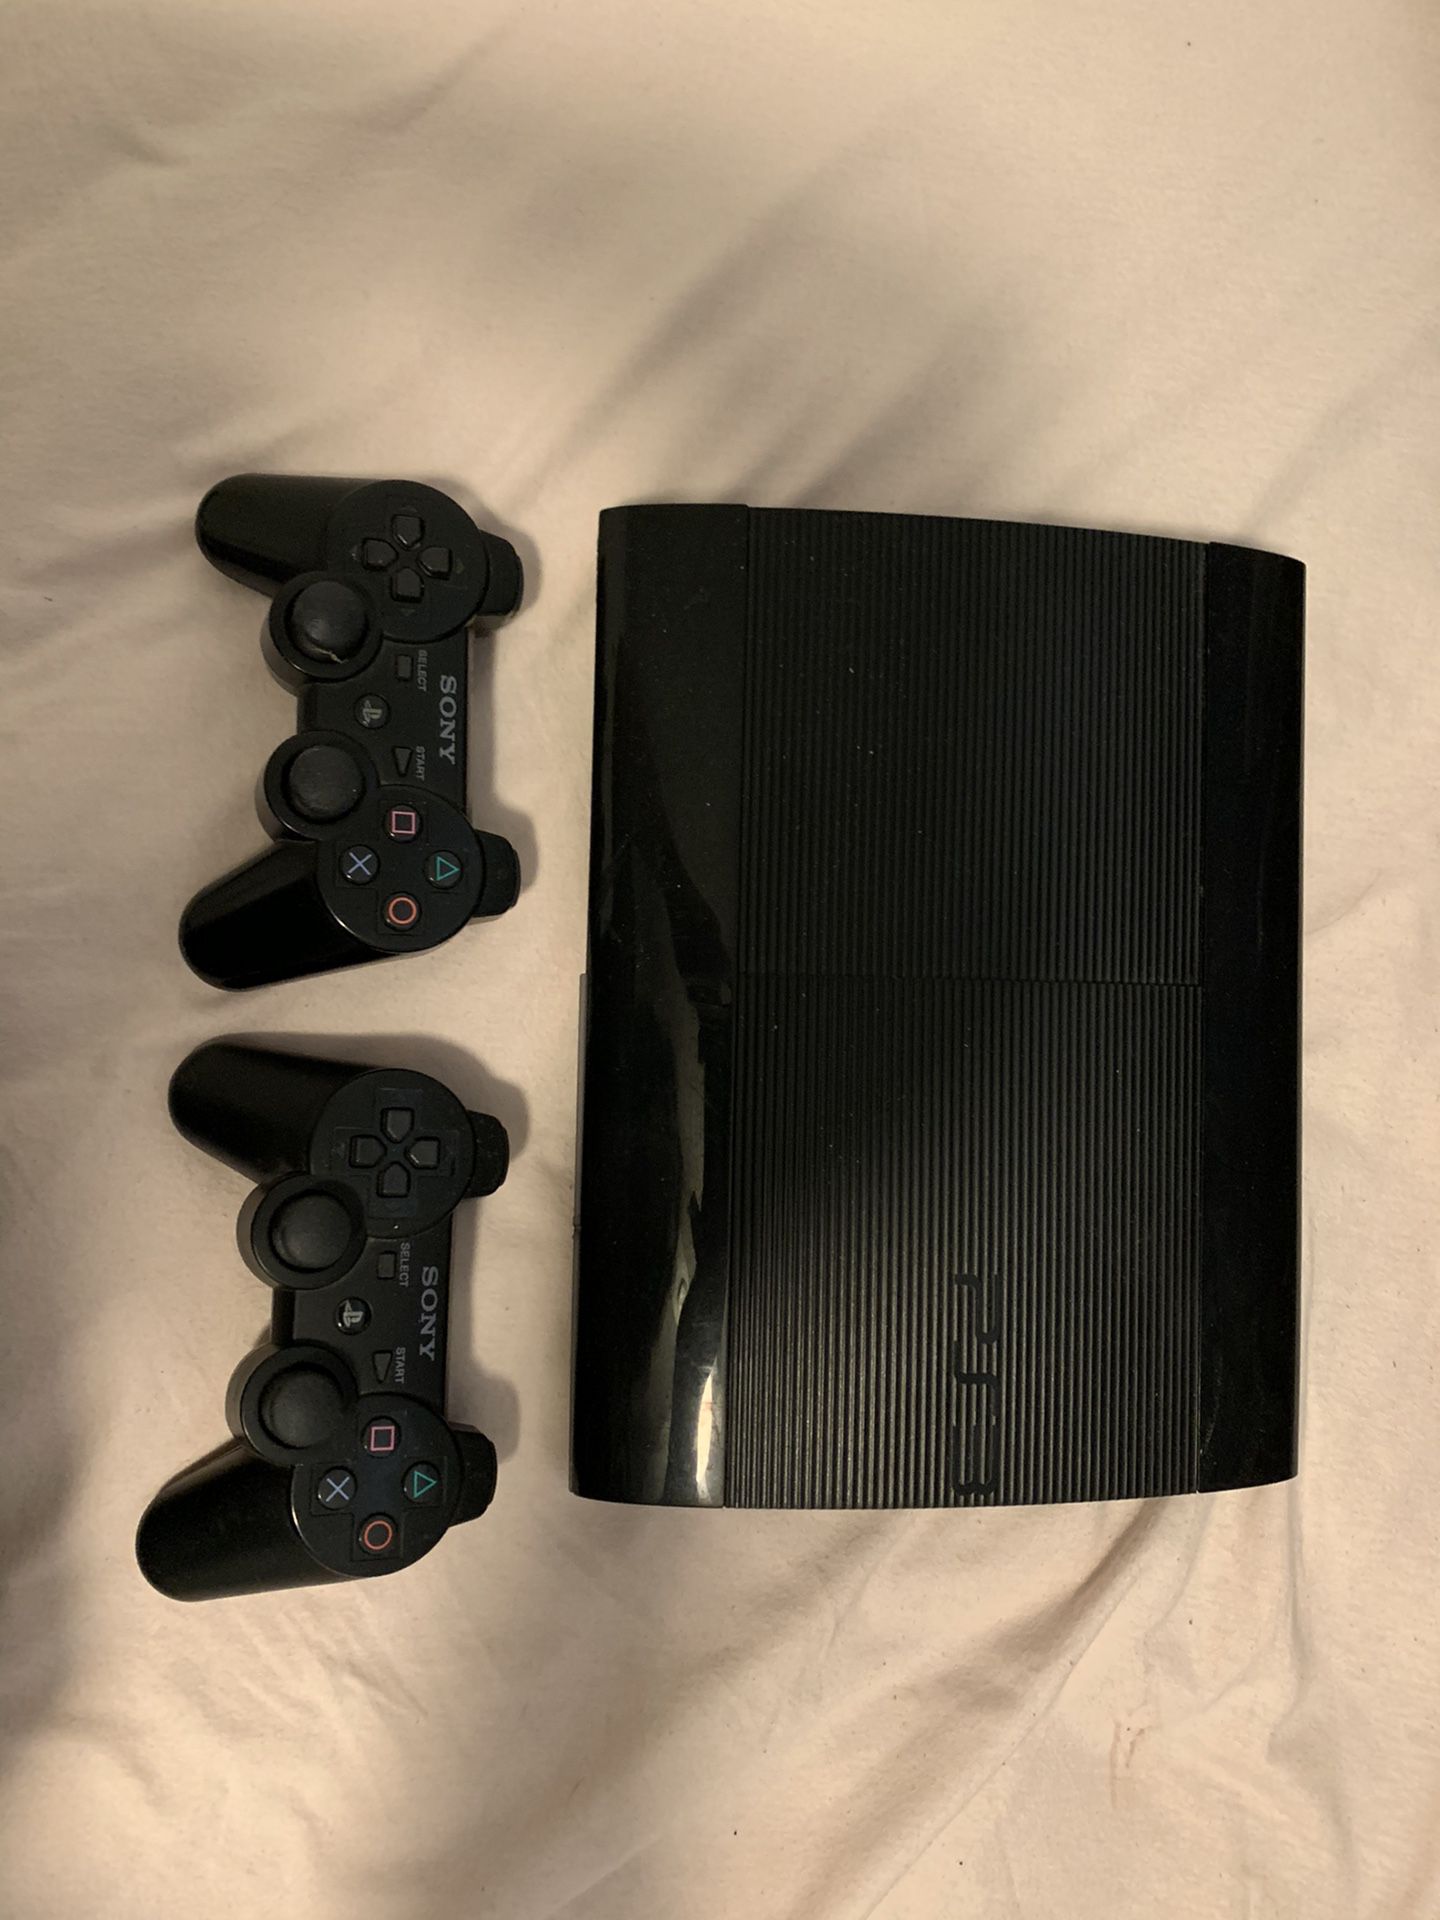 PS3 w/ 2 controllers